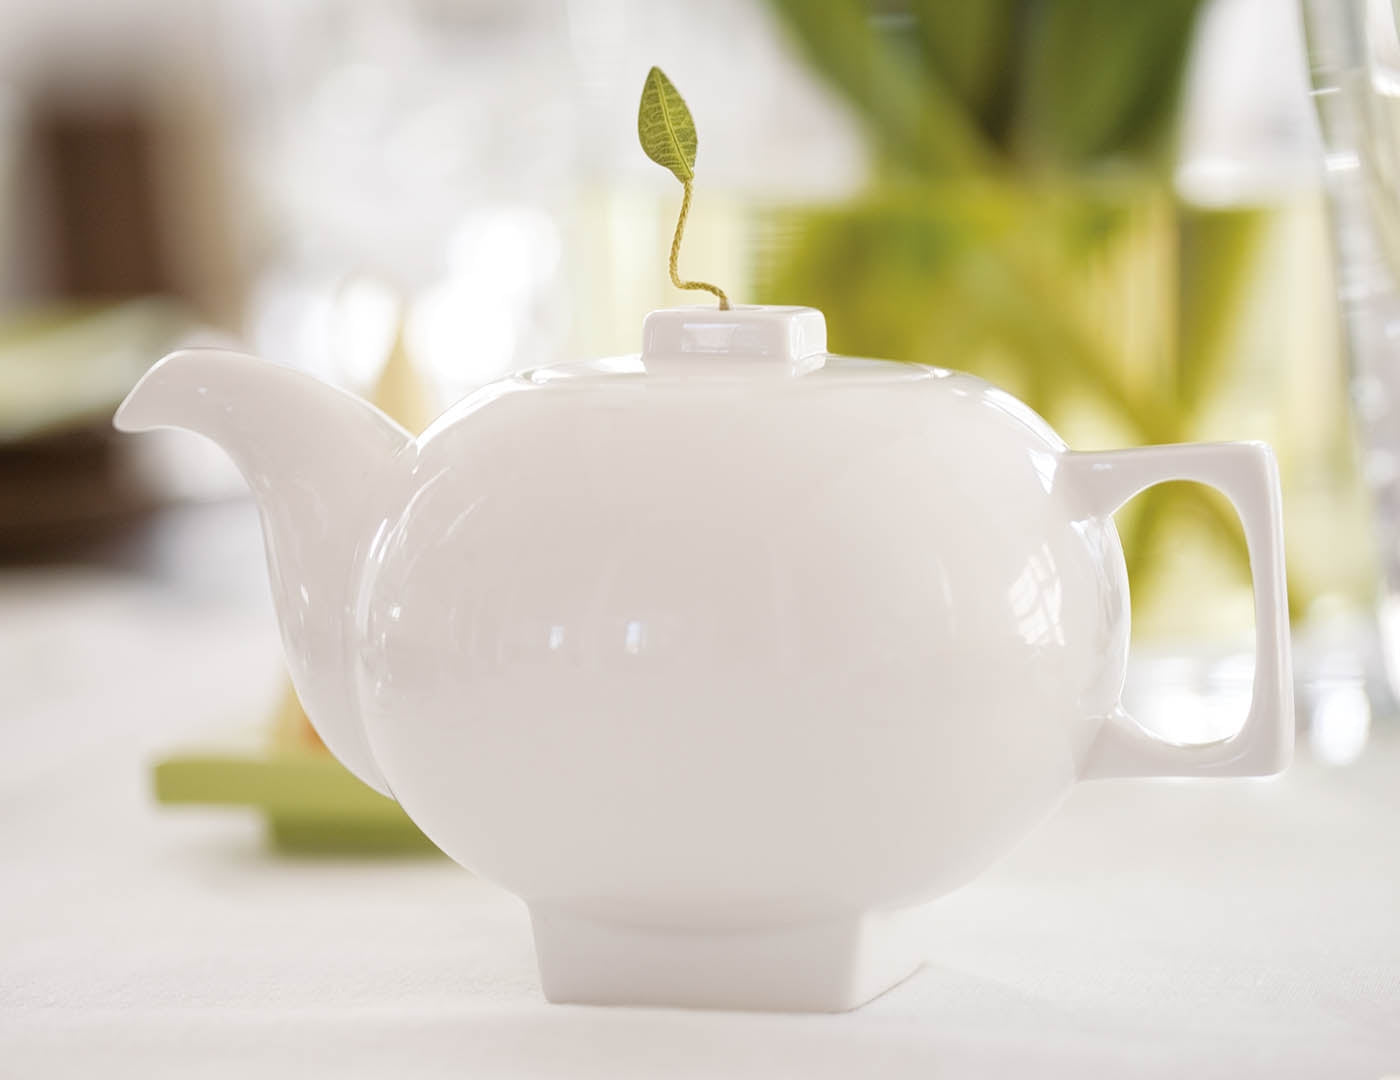 Solstice Teapot with infuser inside